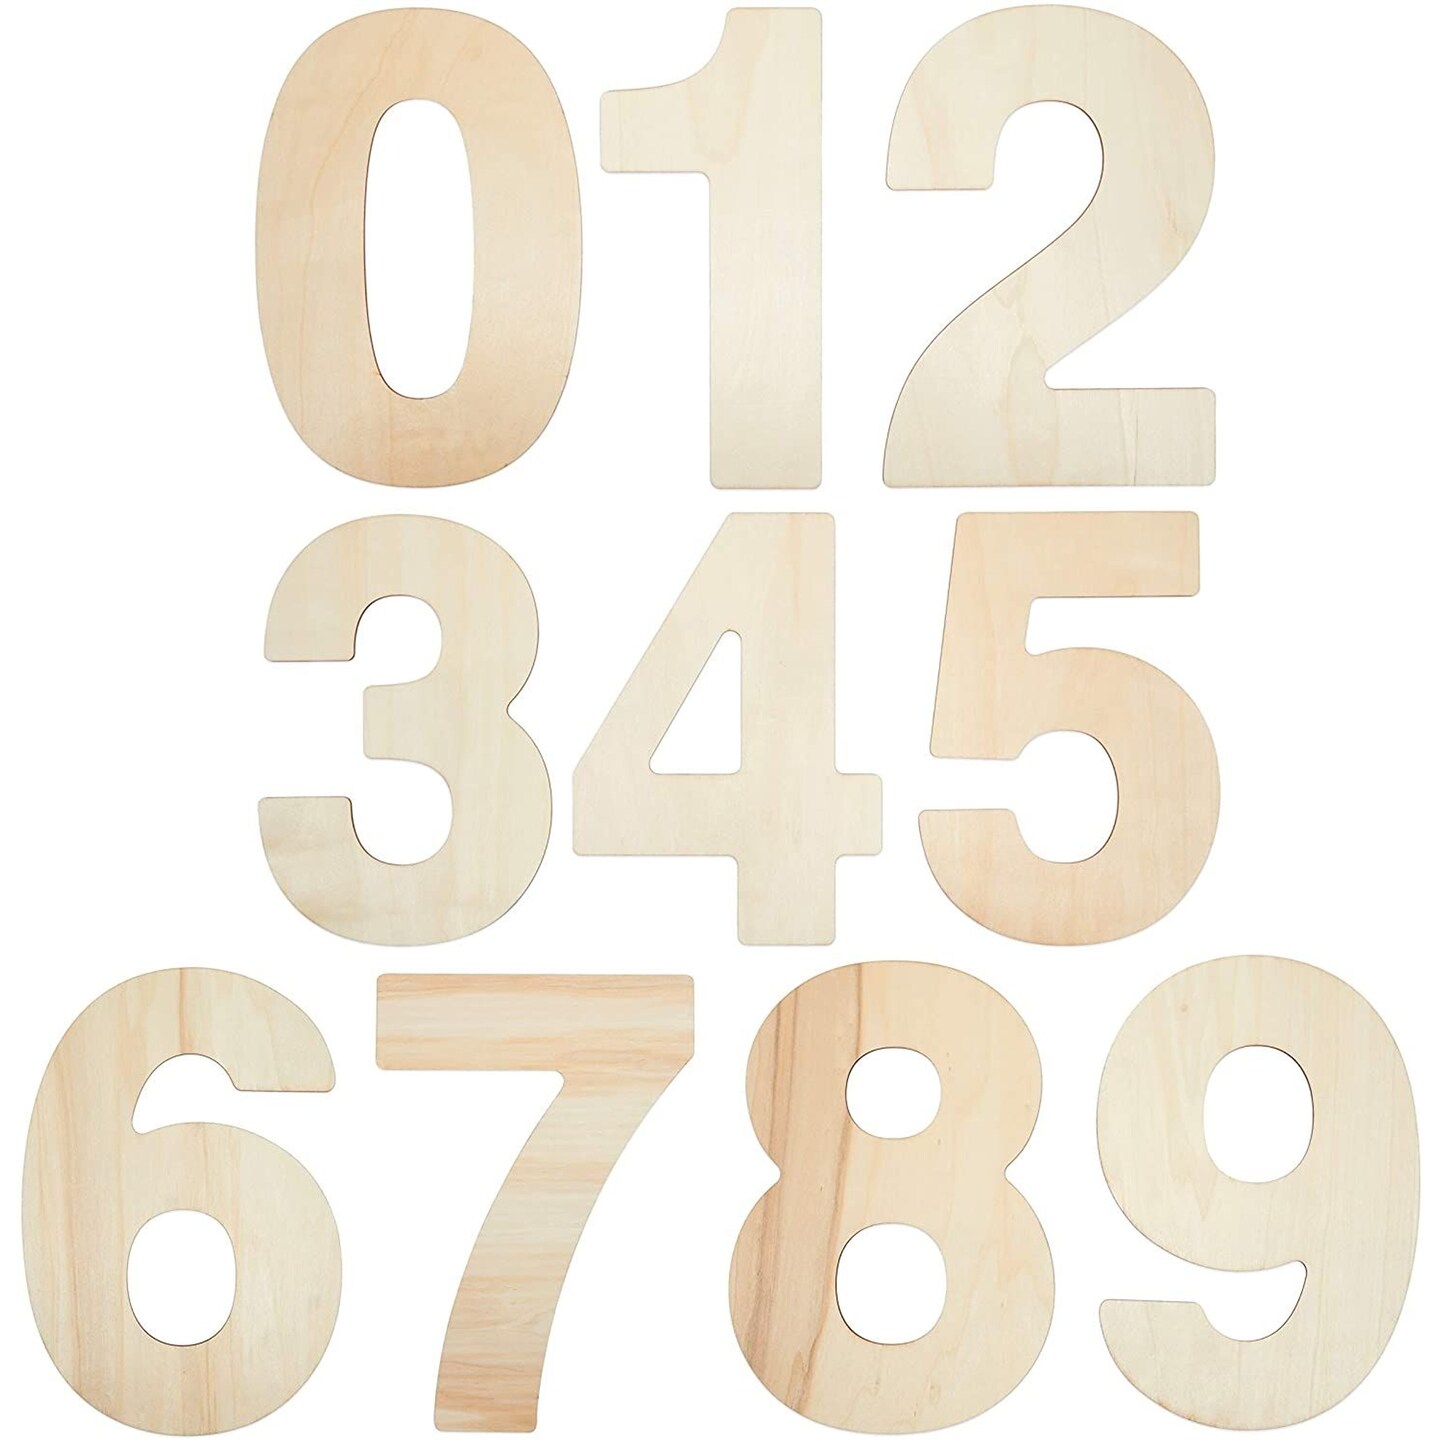 Creativity Street® Letters and Numbers, Natural Wood, 1.5, 200 Pieces